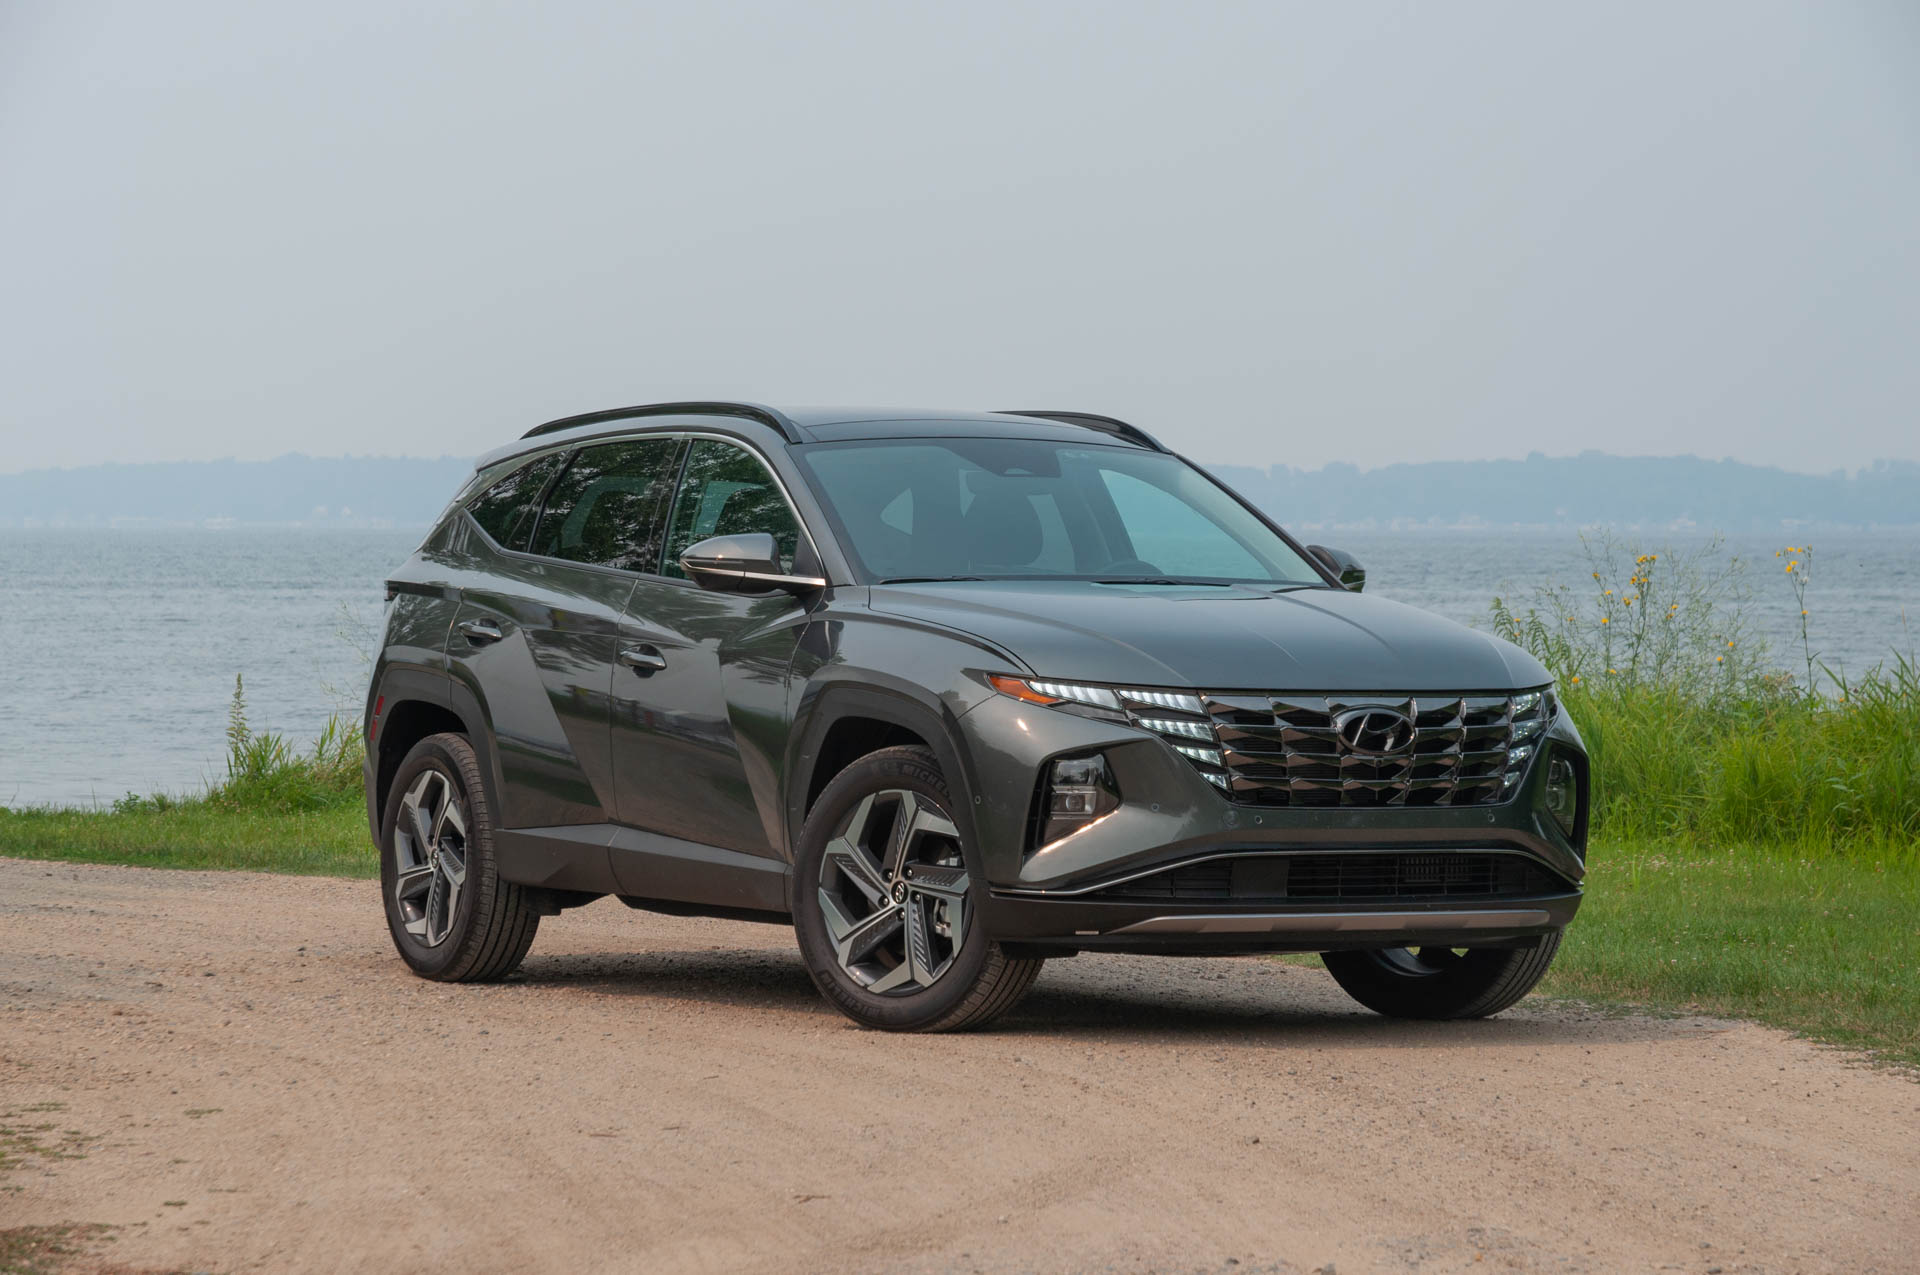 What is the gas mileage of the 2022 Hyundai Tucson?